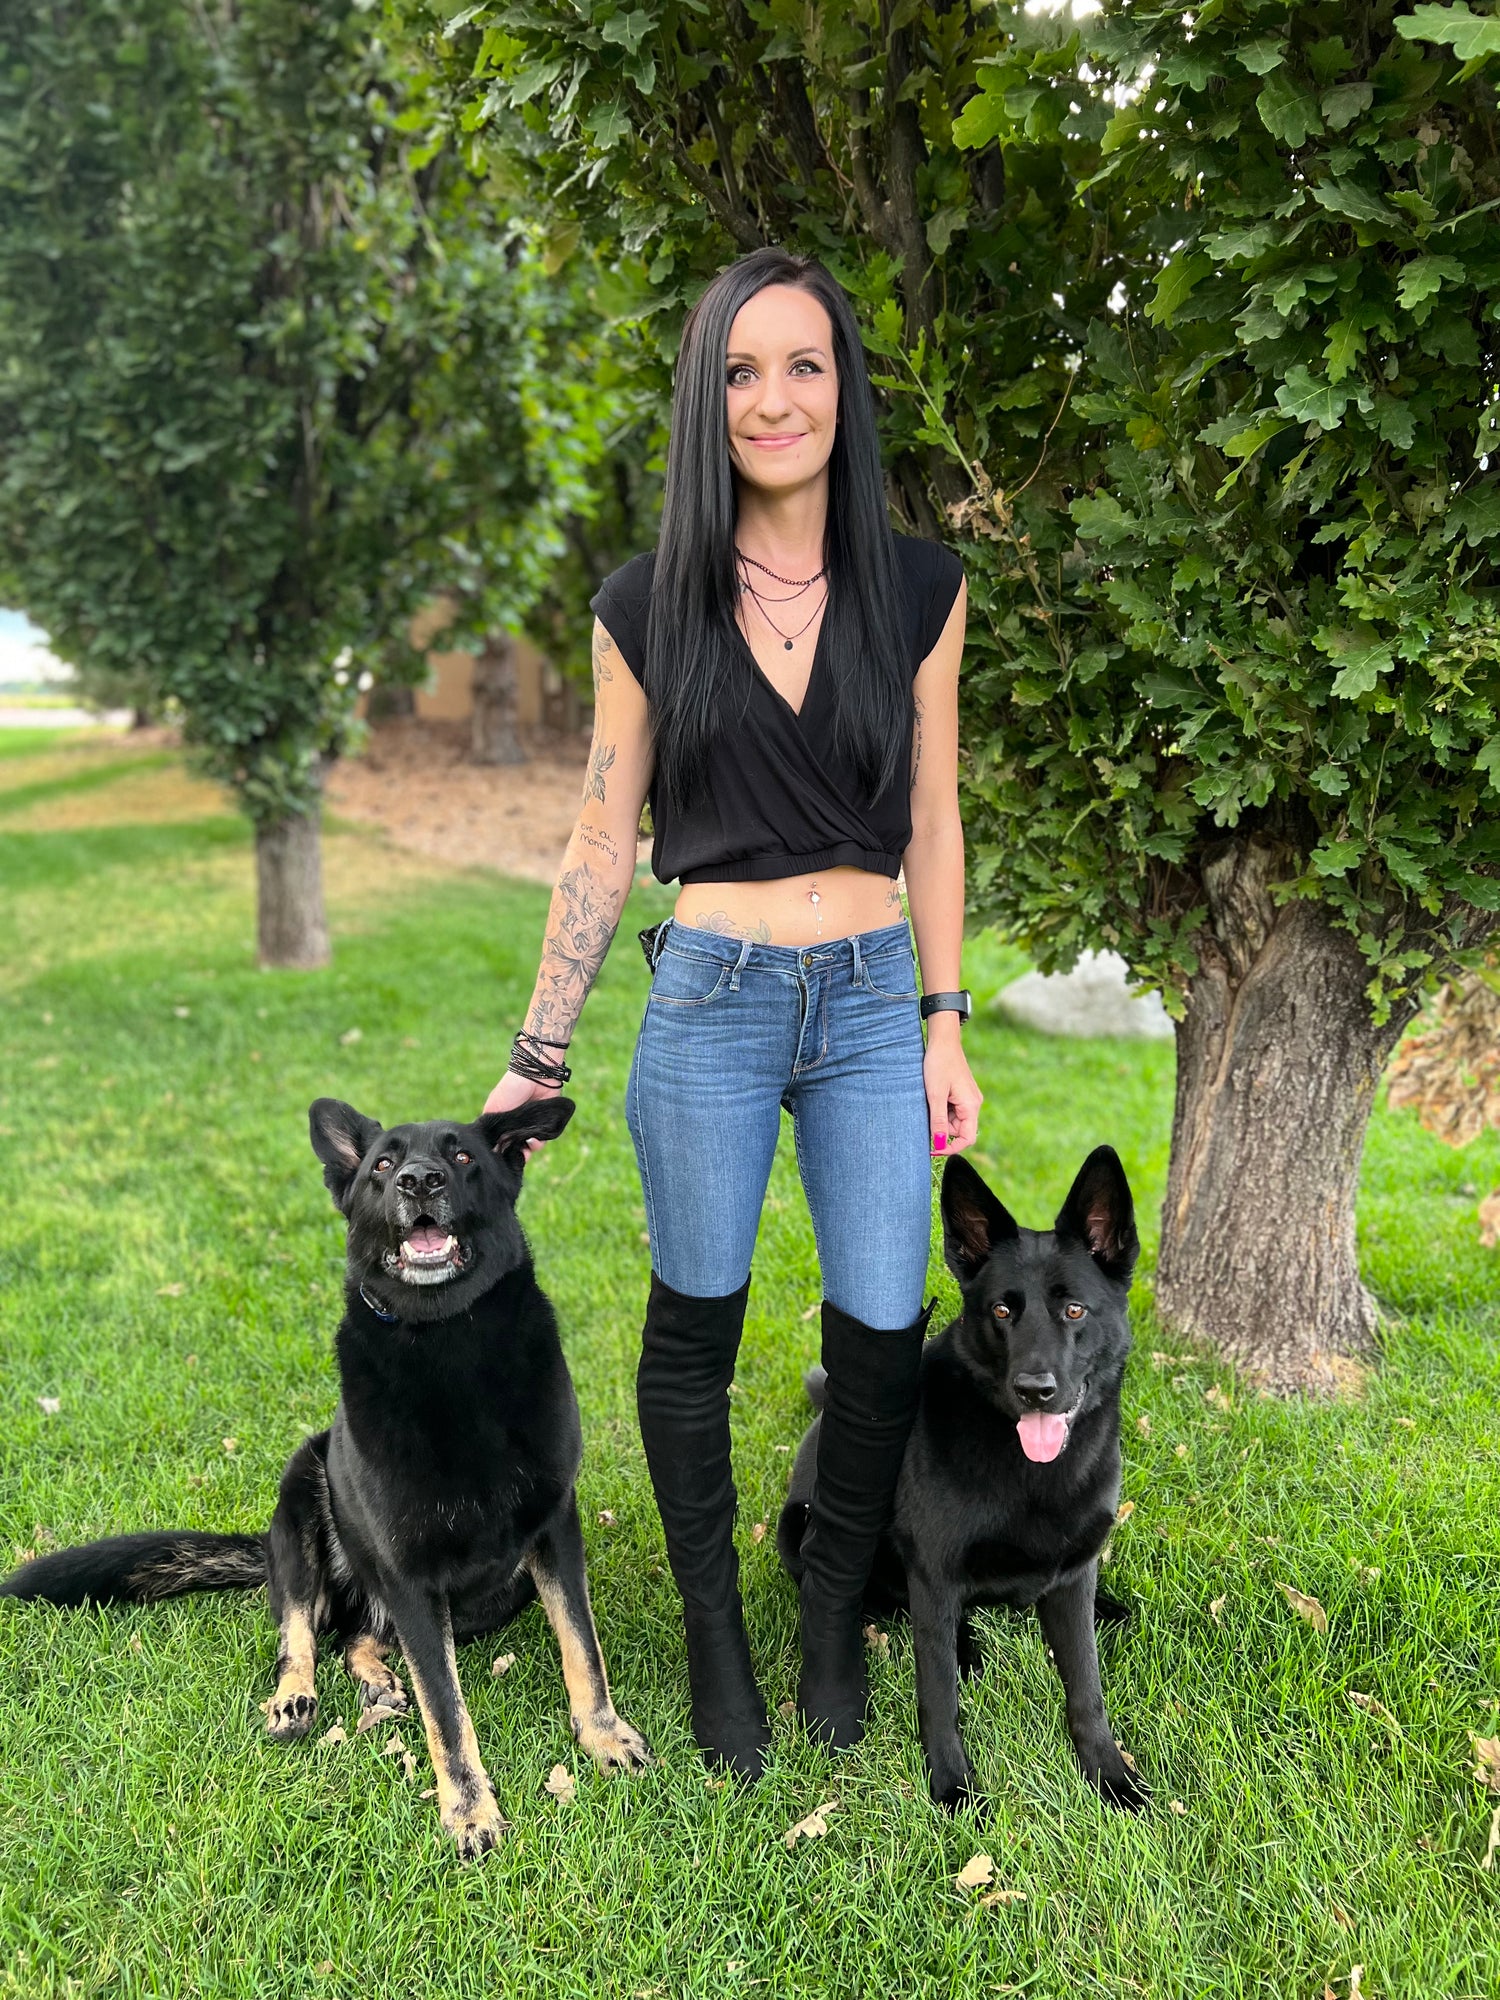 the owner of KM Customs and her dogs